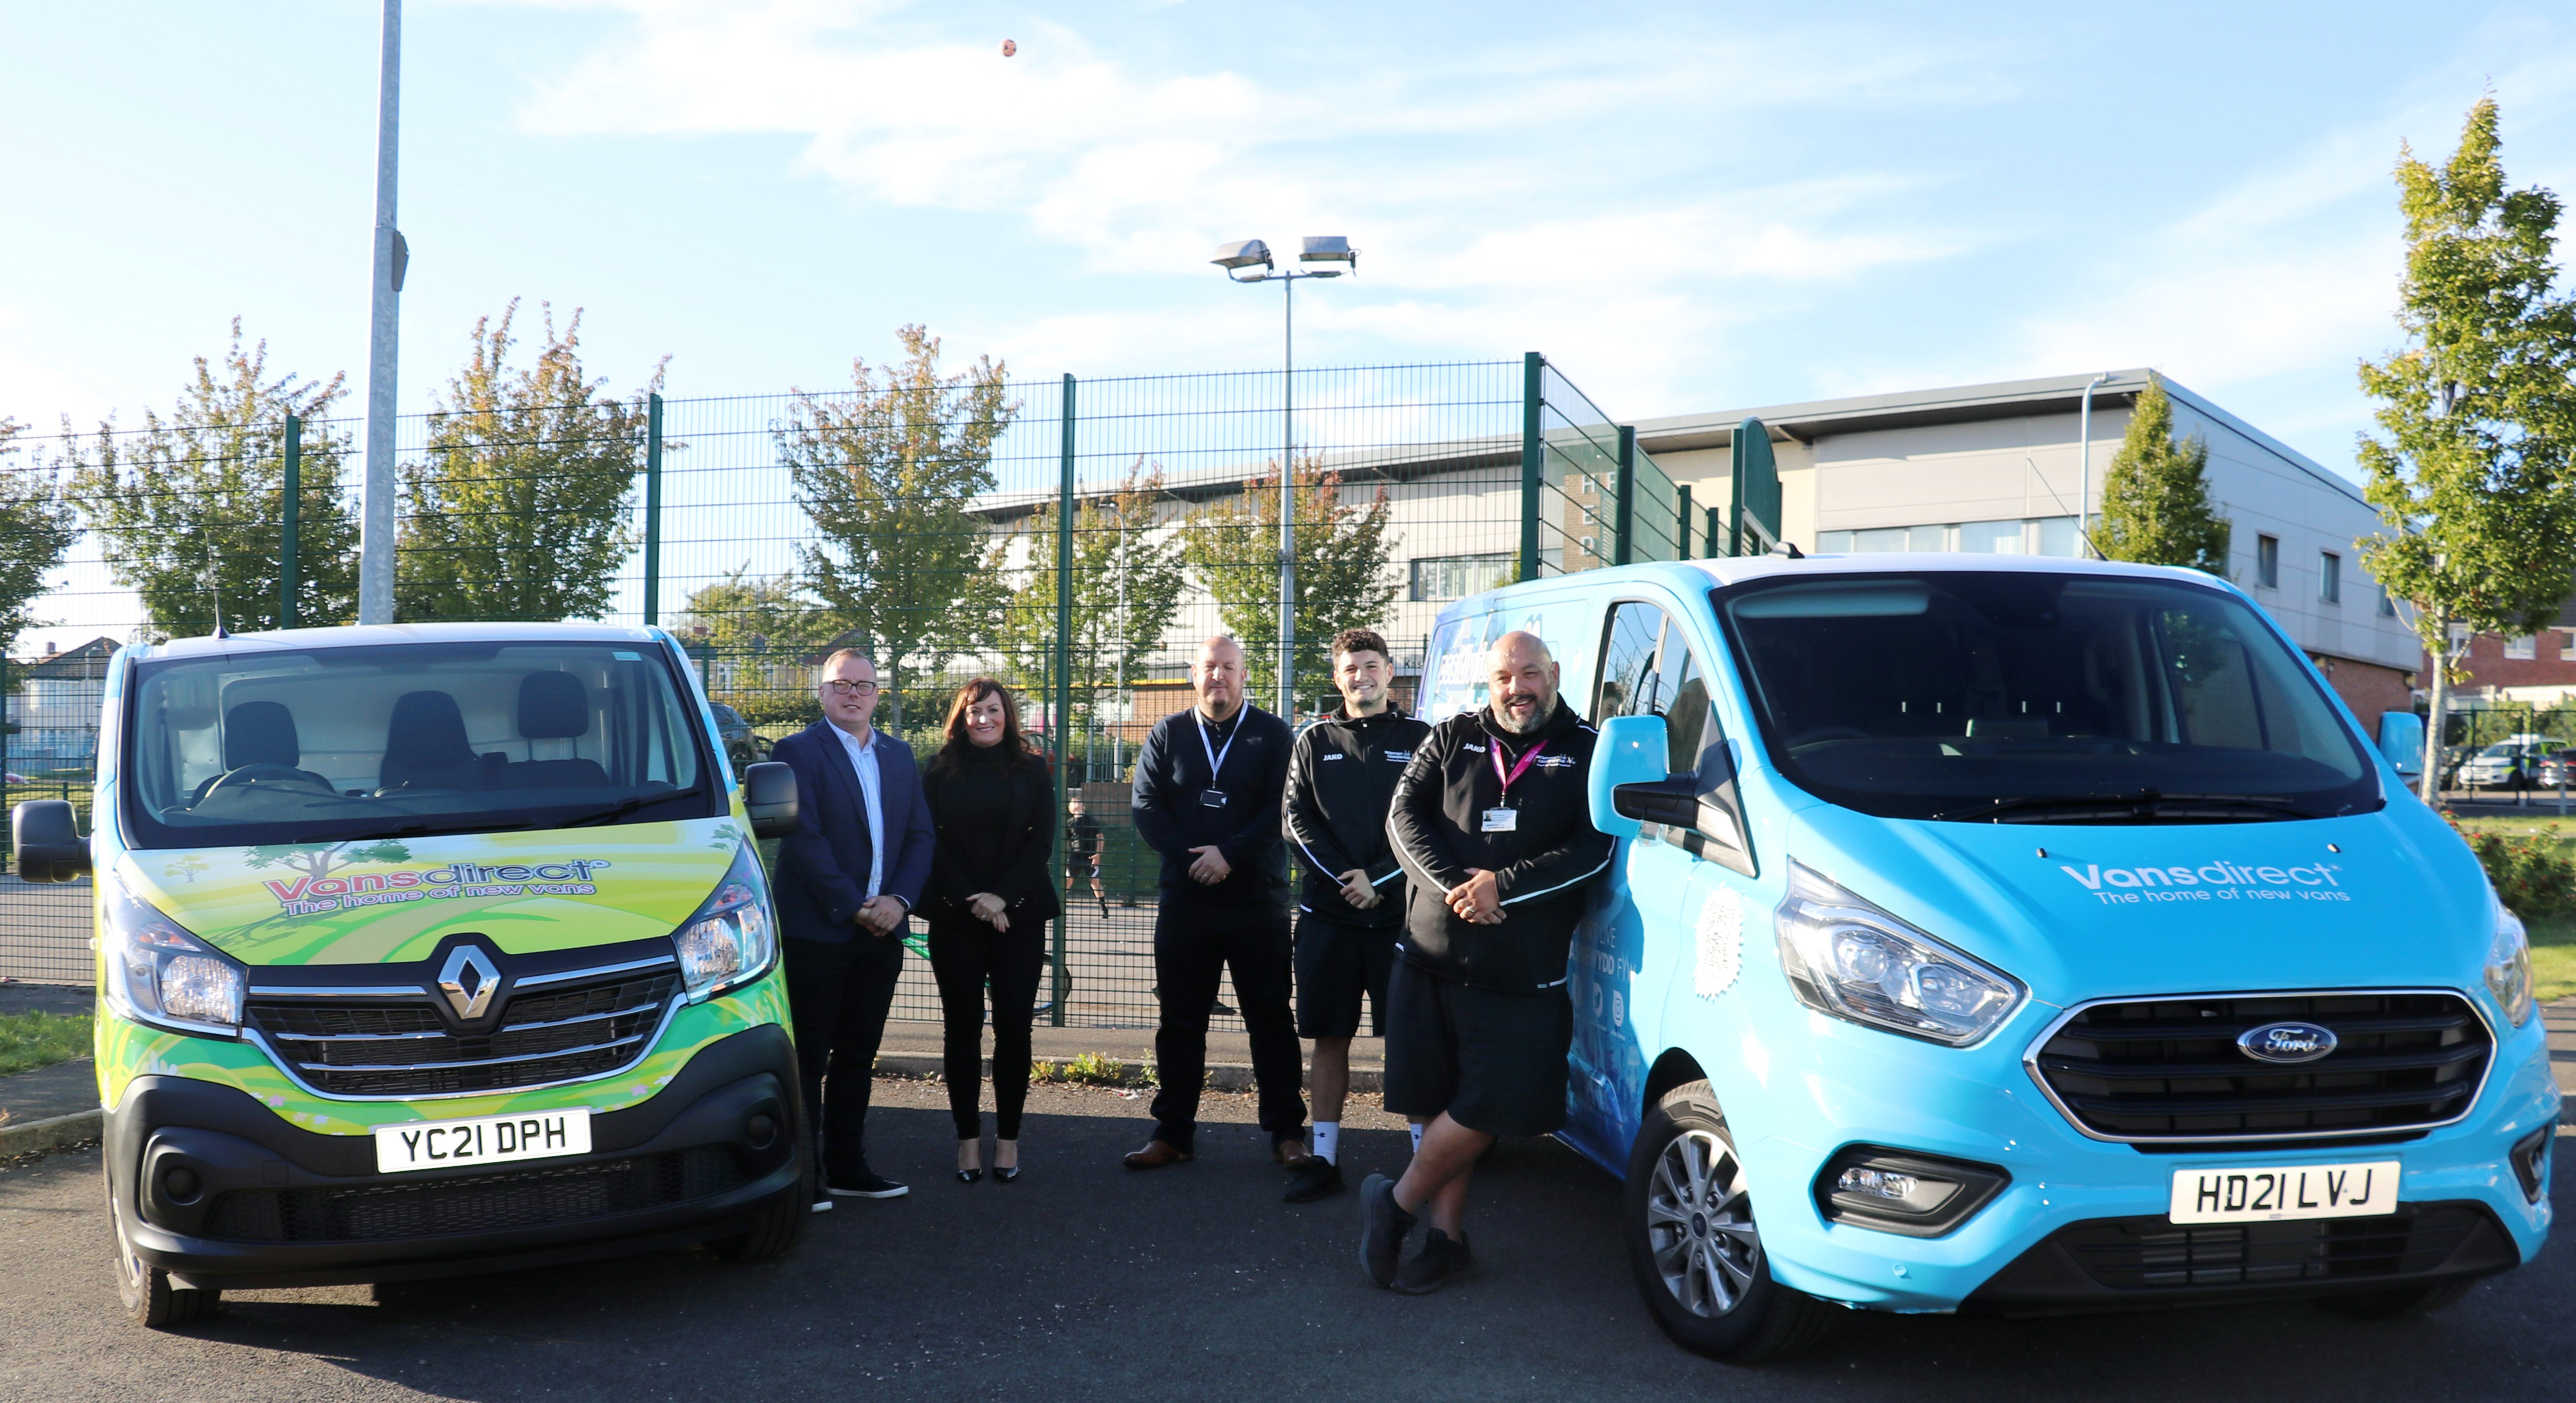 Staff members from Vansdirect and Newport Live standing by branded vans